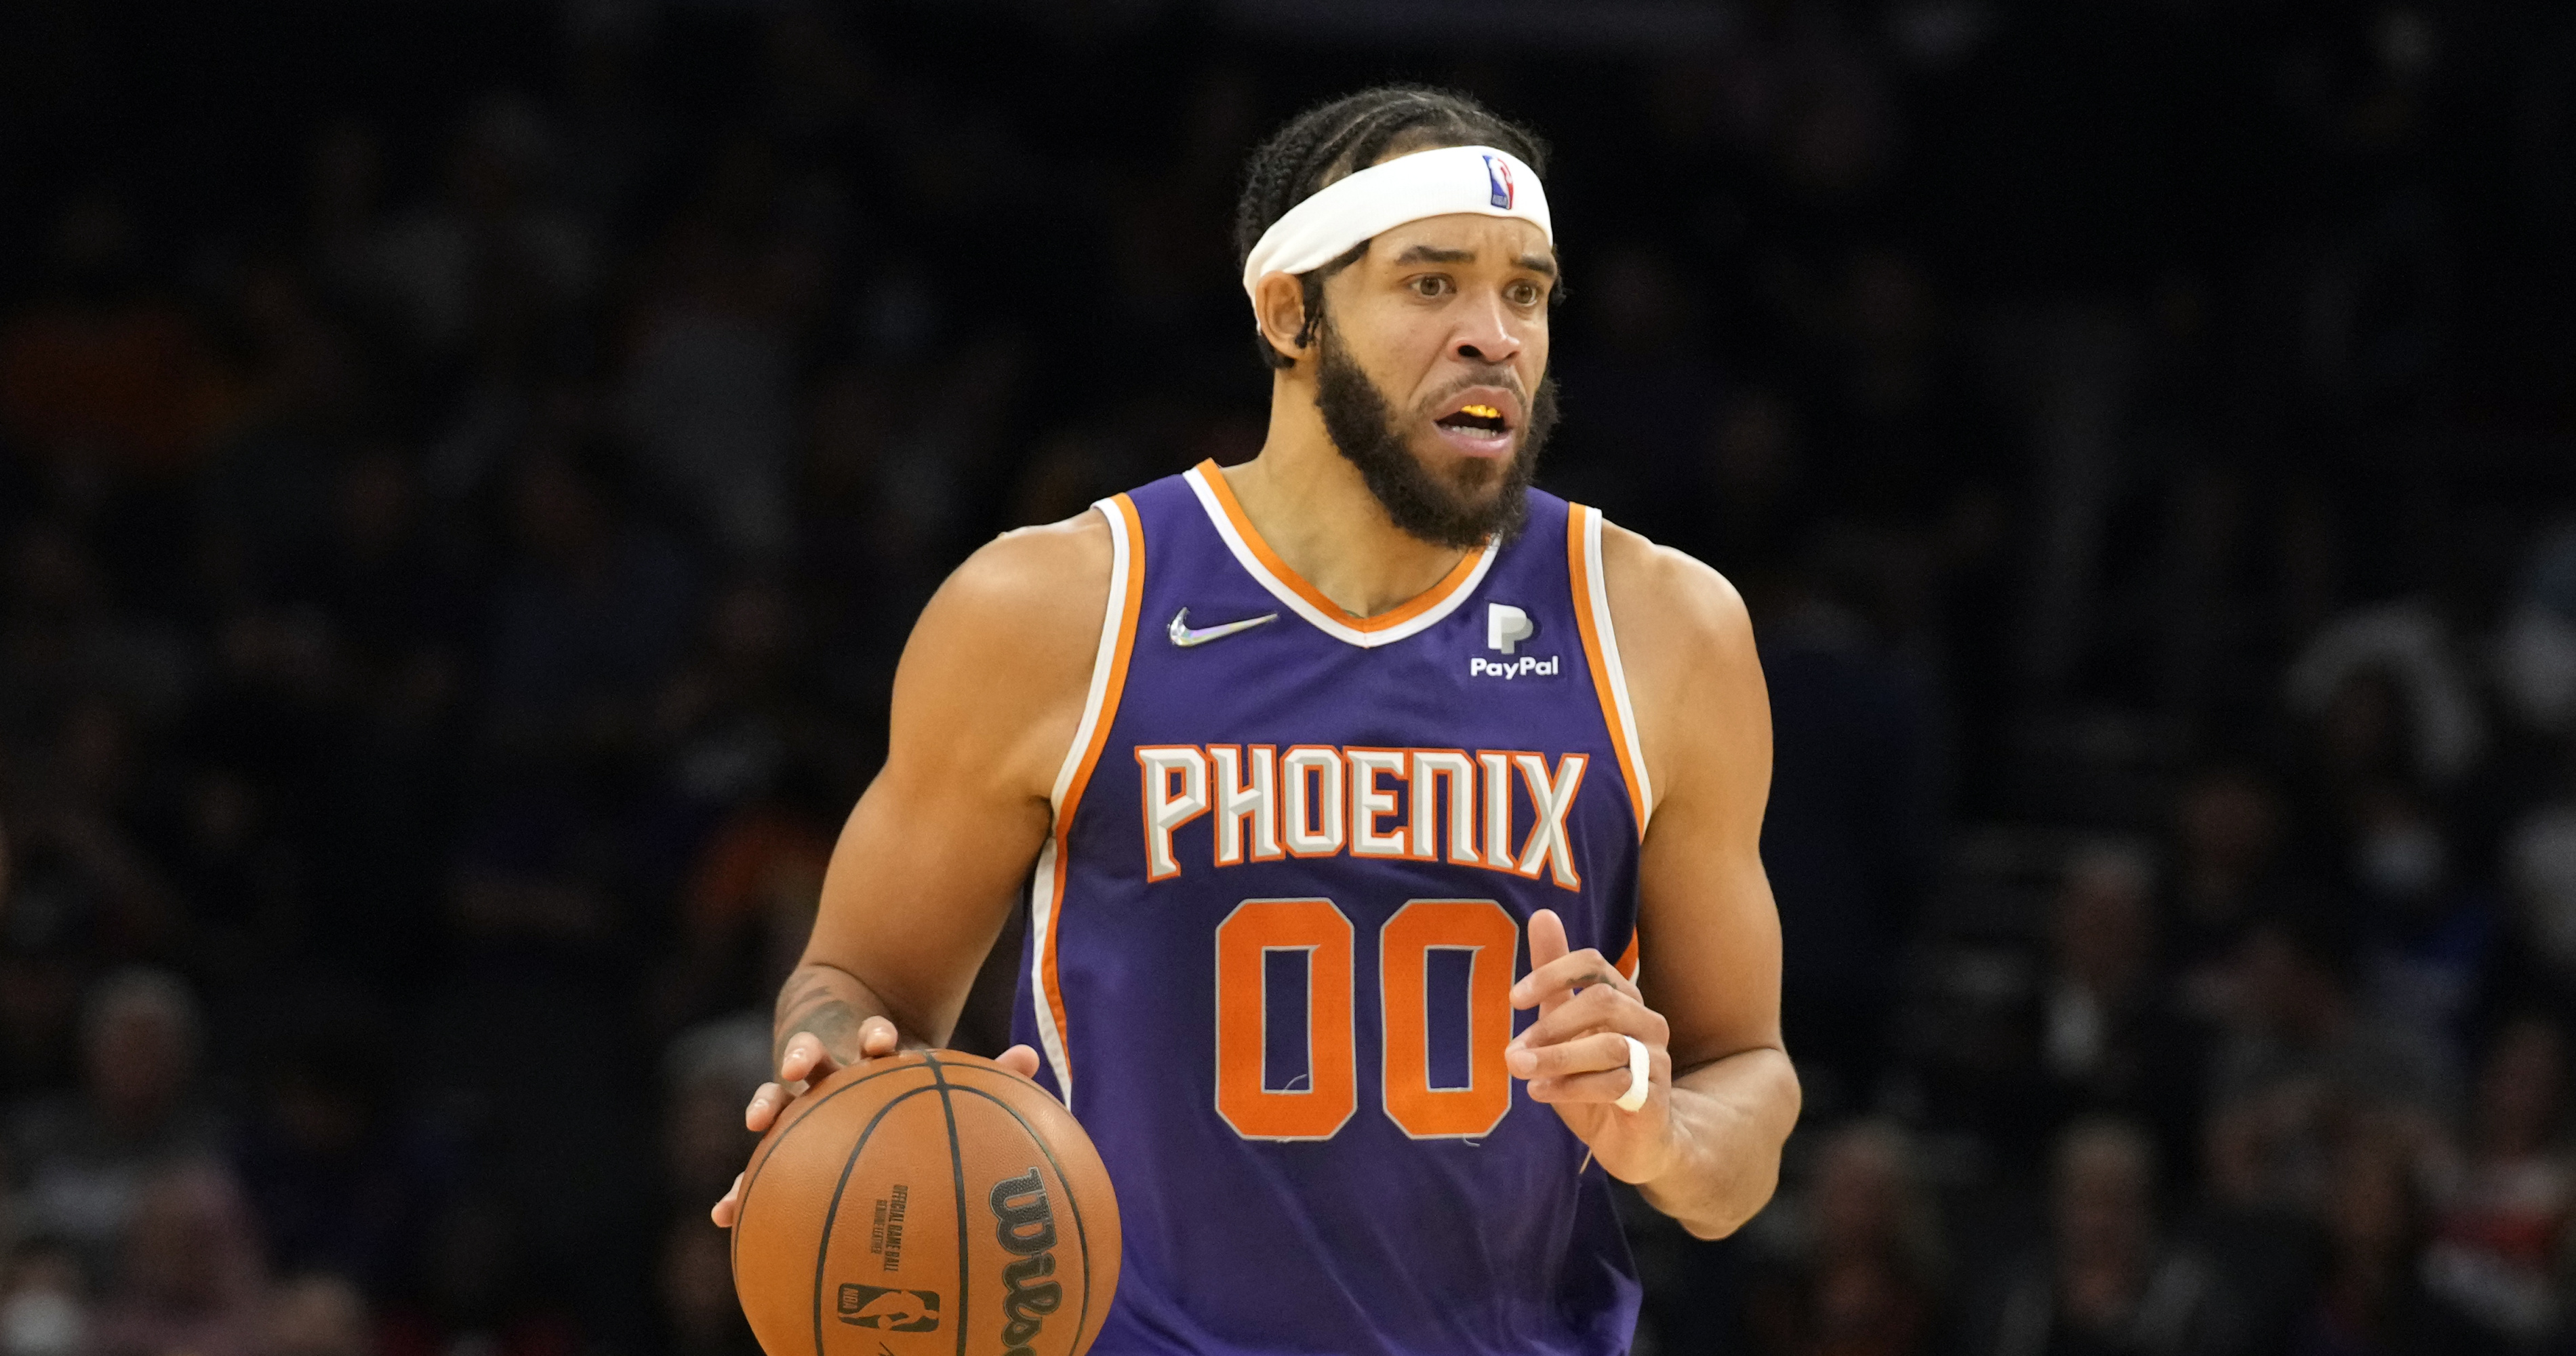 JaVale McGee joins the Suns on one-year deal / News 